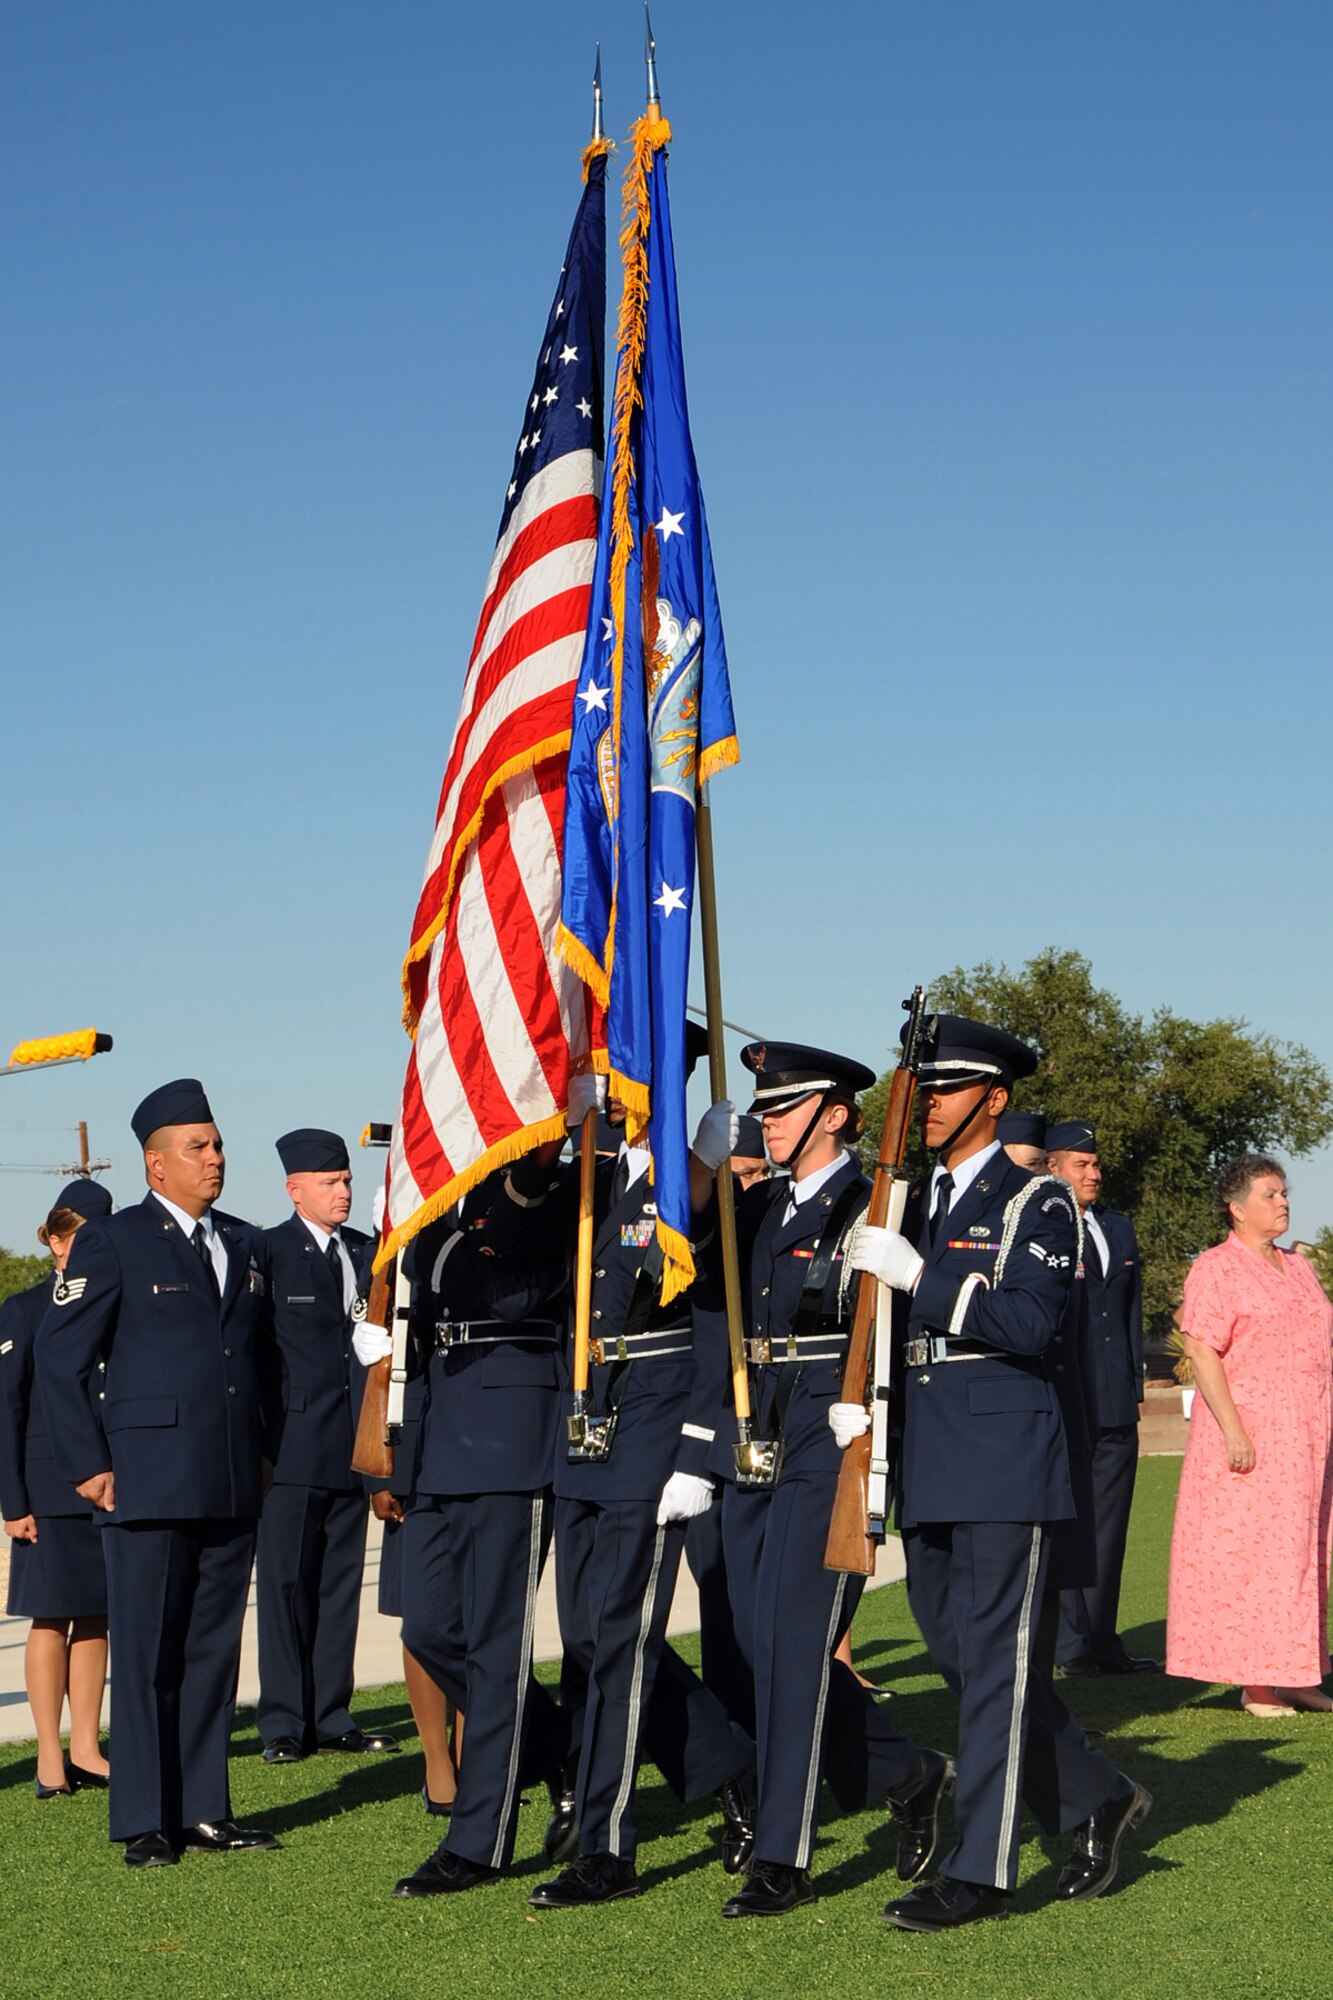 Steel Talons Honor Guard members post the colors at the beginning of a ceremony to honor the Prisoners of War/Missing in Action Day at Holloman AFB, N.M. on September 23. (U.S.Air Force photo/ Staff Sgt. Chris Flahive)